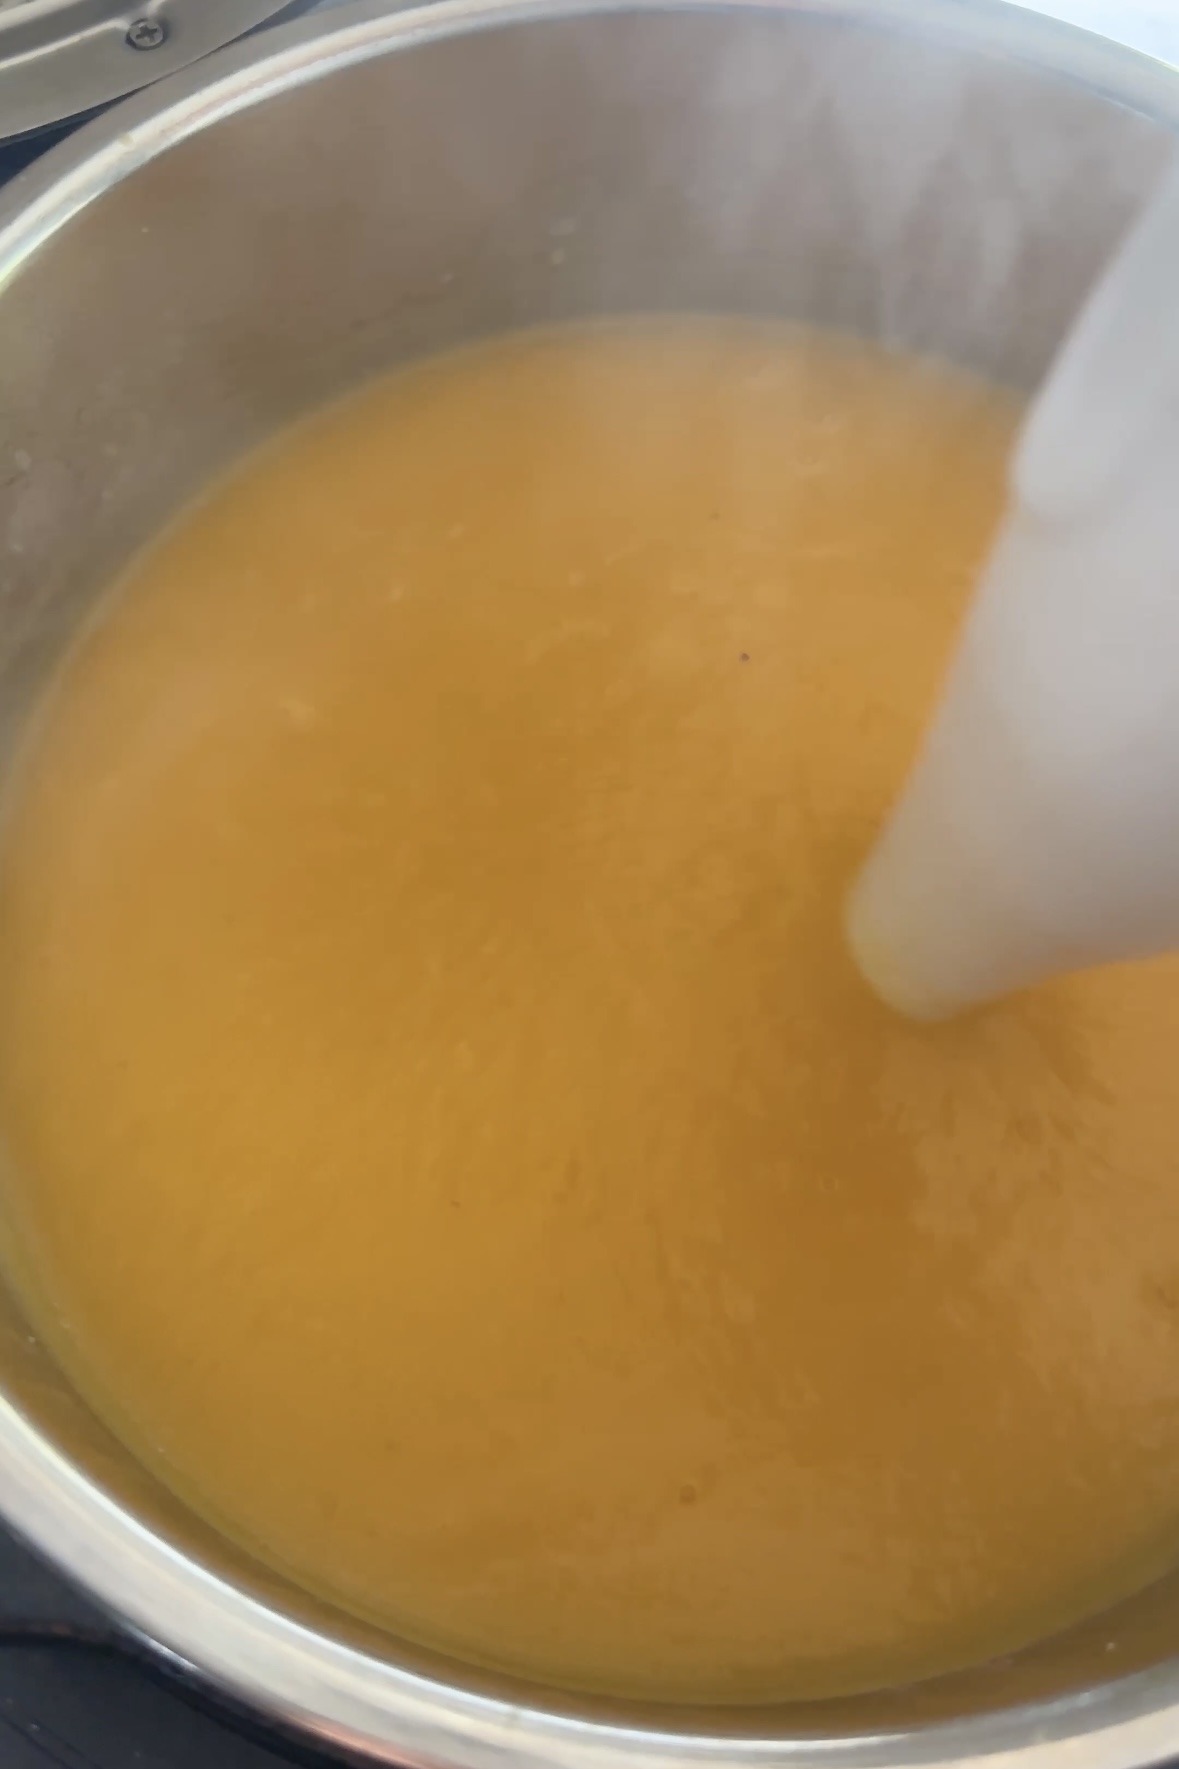 An orange pureed soup is blended.